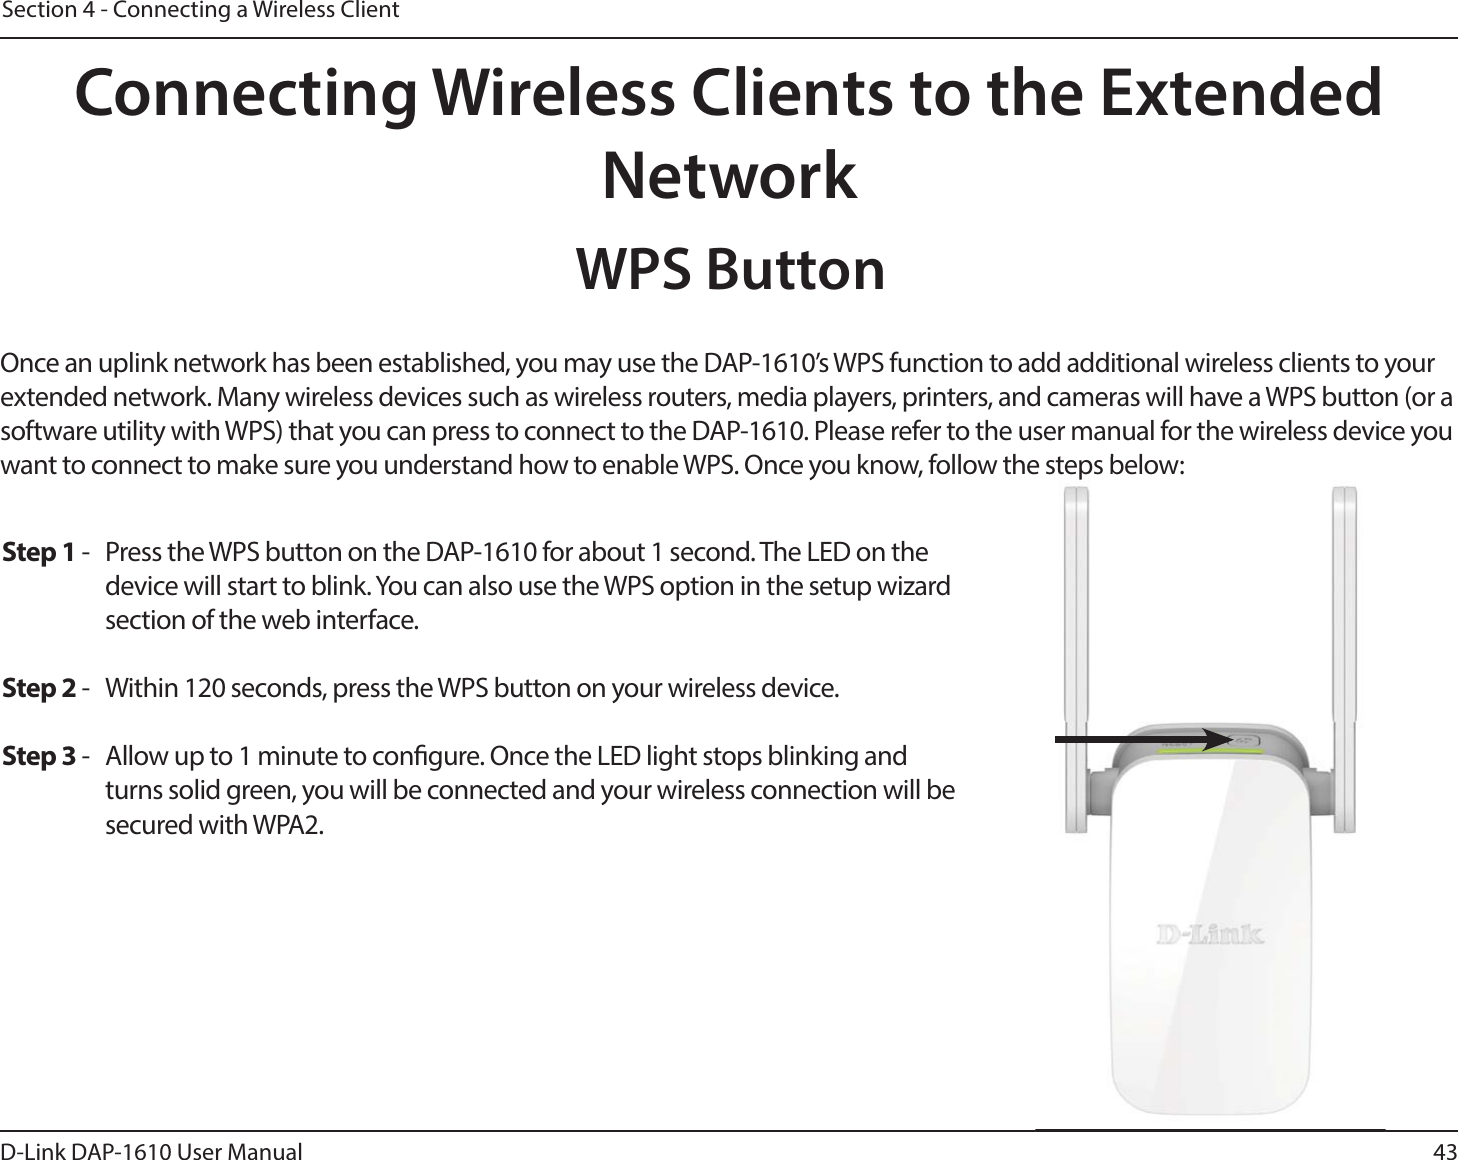 43D-Link DAP-1610 User ManualSection 4 - Connecting a Wireless ClientConnecting Wireless Clients to the Extended NetworkWPS ButtonOnce an uplink network has been established, you may use the DAP-1610’s WPS function to add additional wireless clients to your extended network. Many wireless devices such as wireless routers, media players, printers, and cameras will have a WPS button (or a software utility with WPS) that you can press to connect to the DAP-1610. Please refer to the user manual for the wireless device you want to connect to make sure you understand how to enable WPS. Once you know, follow the steps below:Step 1 -  Press the WPS button on the DAP-1610 for about 1 second. The LED on the device will start to blink. You can also use the WPS option in the setup wizard section of the web interface. Step 2 -  Within 120 seconds, press the WPS button on your wireless device.Step 3 -  Allow up to 1 minute to congure. Once the LED light stops blinking and turns solid green, you will be connected and your wireless connection will be secured with WPA2.e steps below: